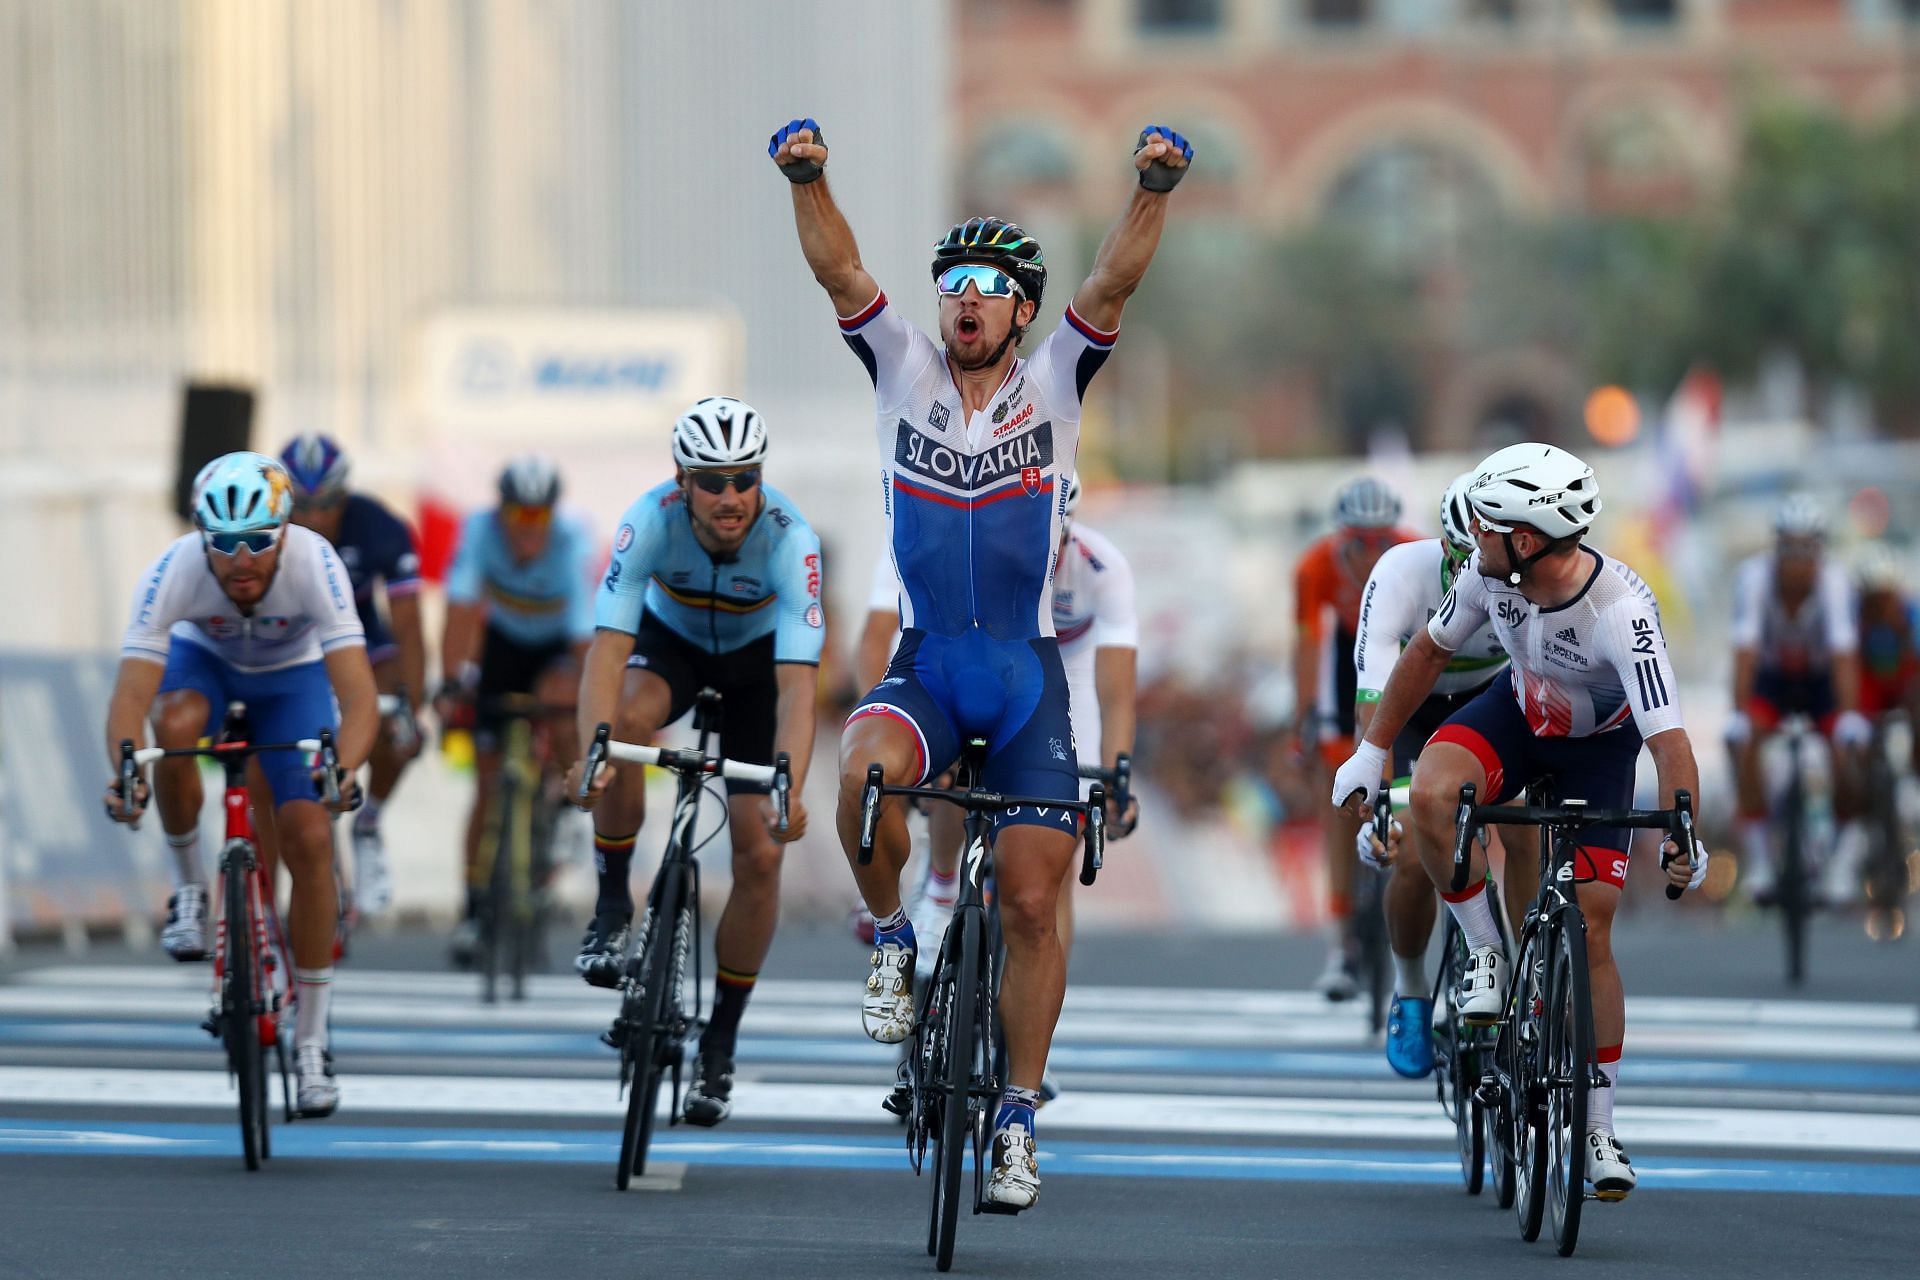 UCI Road World Championships 2022 dates, format, participants and more